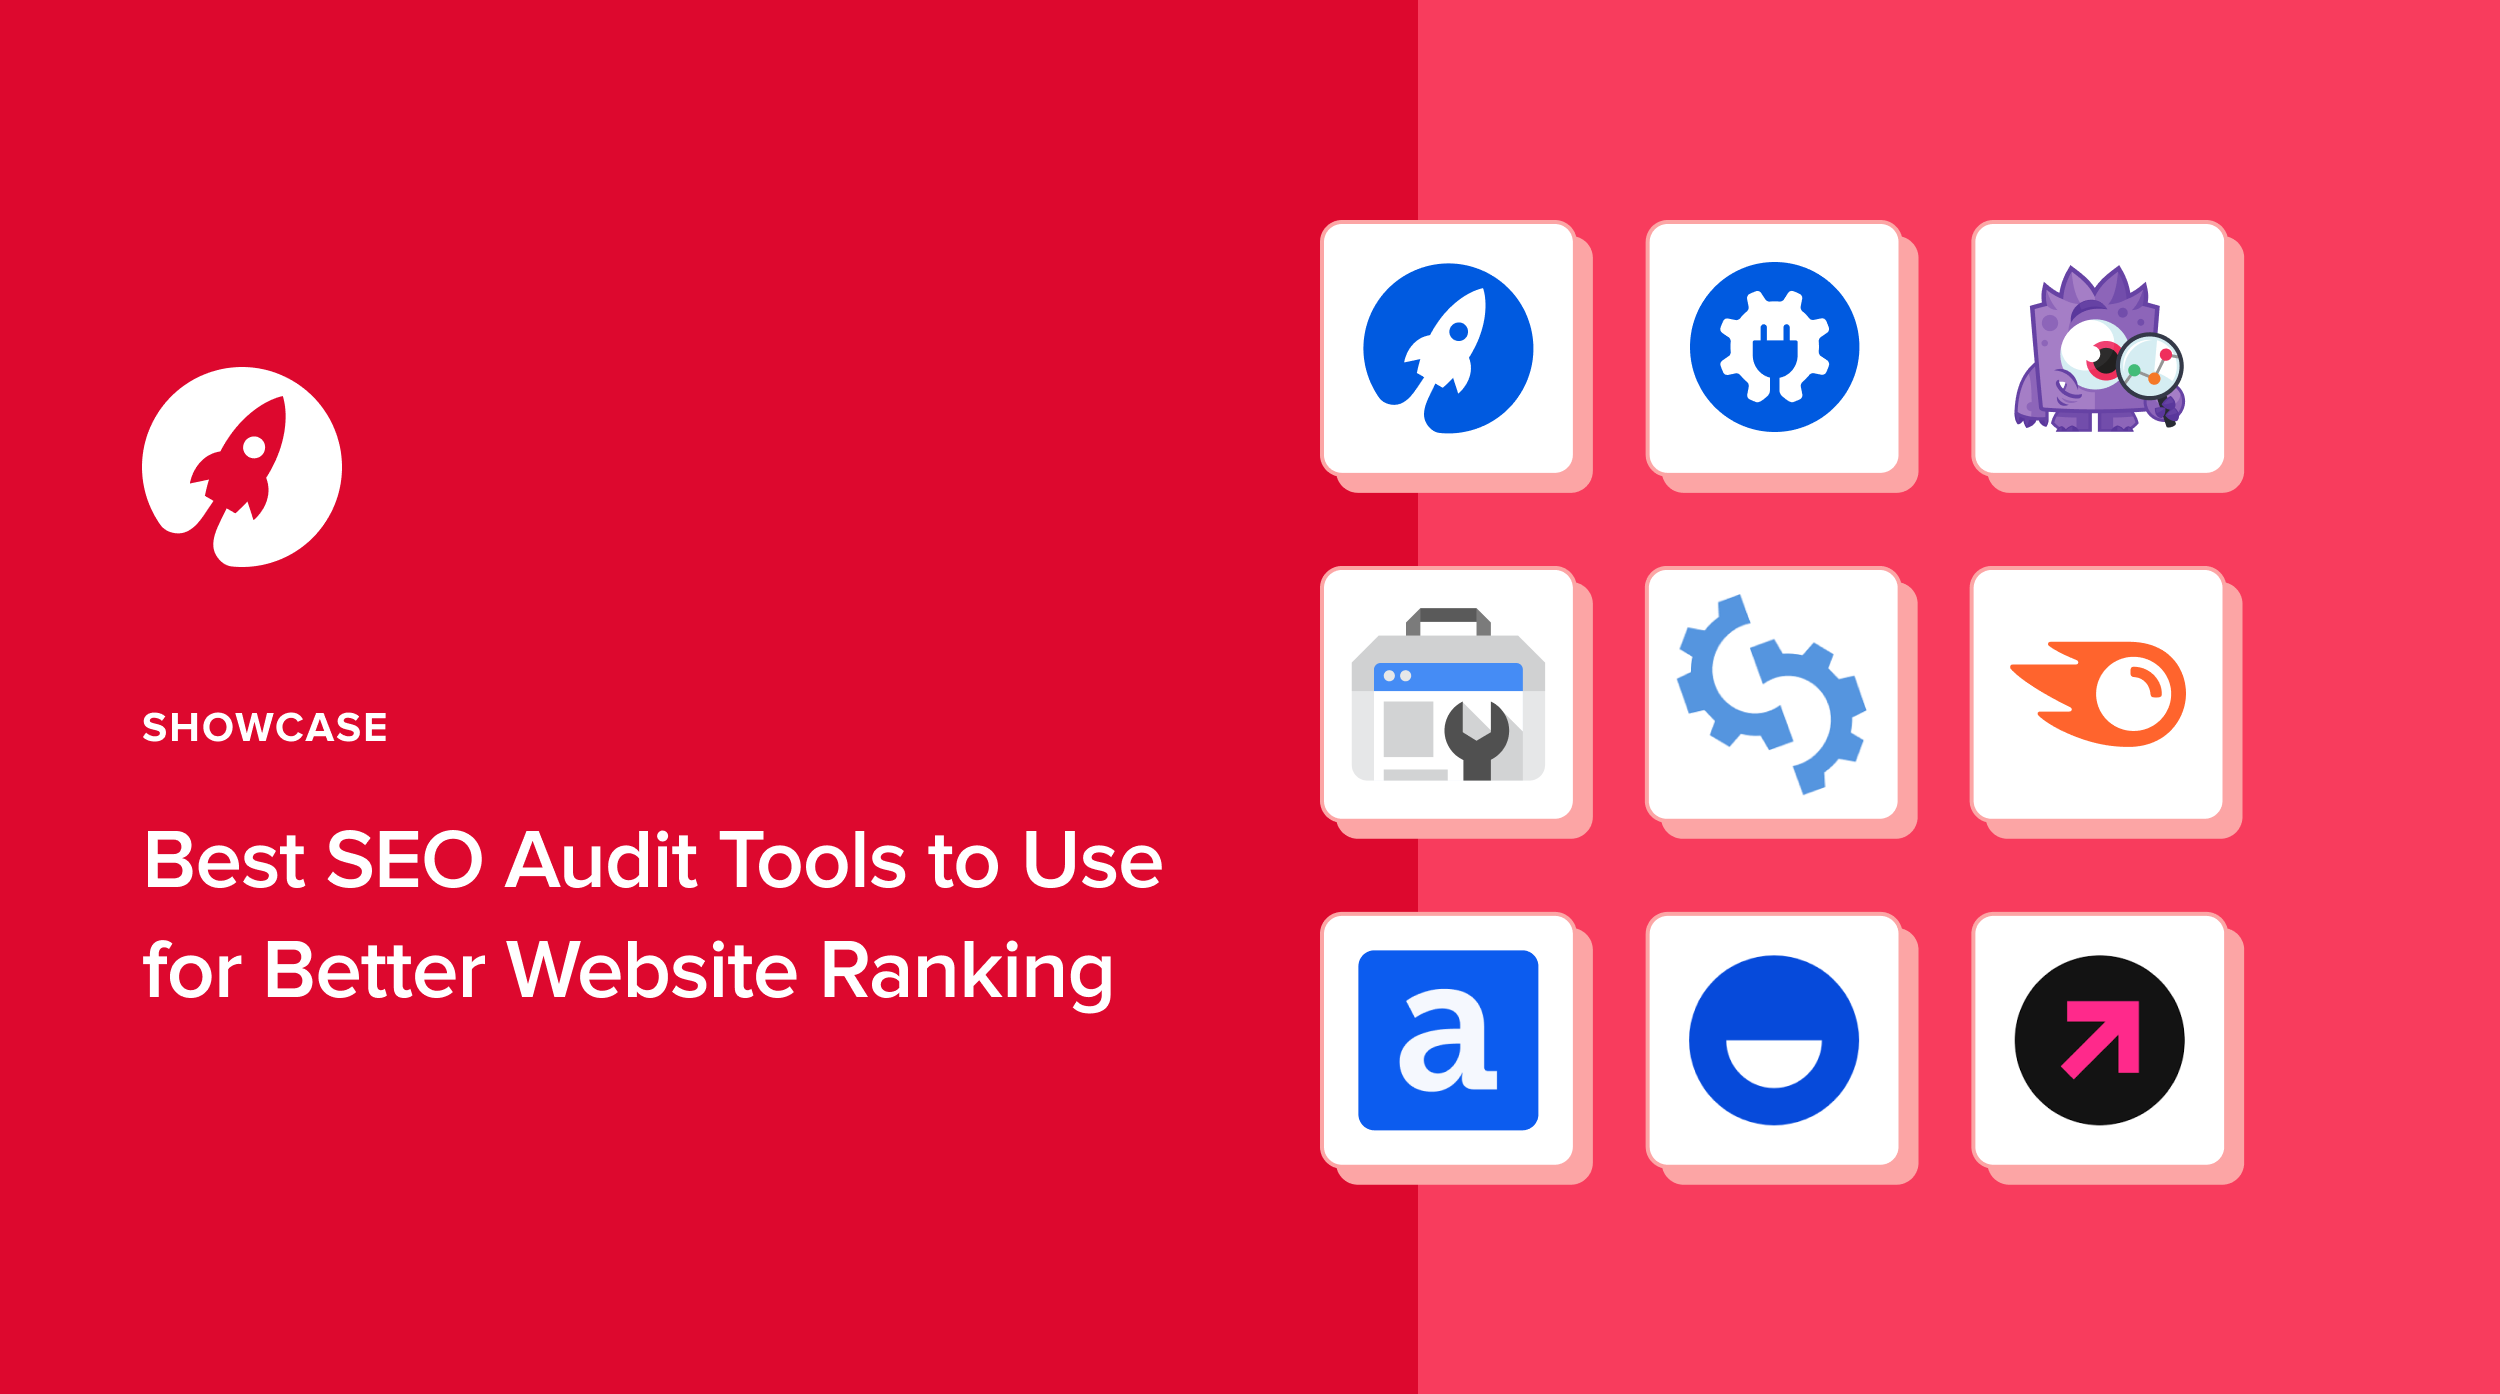 9 Best SEO Audit Tools to Use for Better Website Ranking